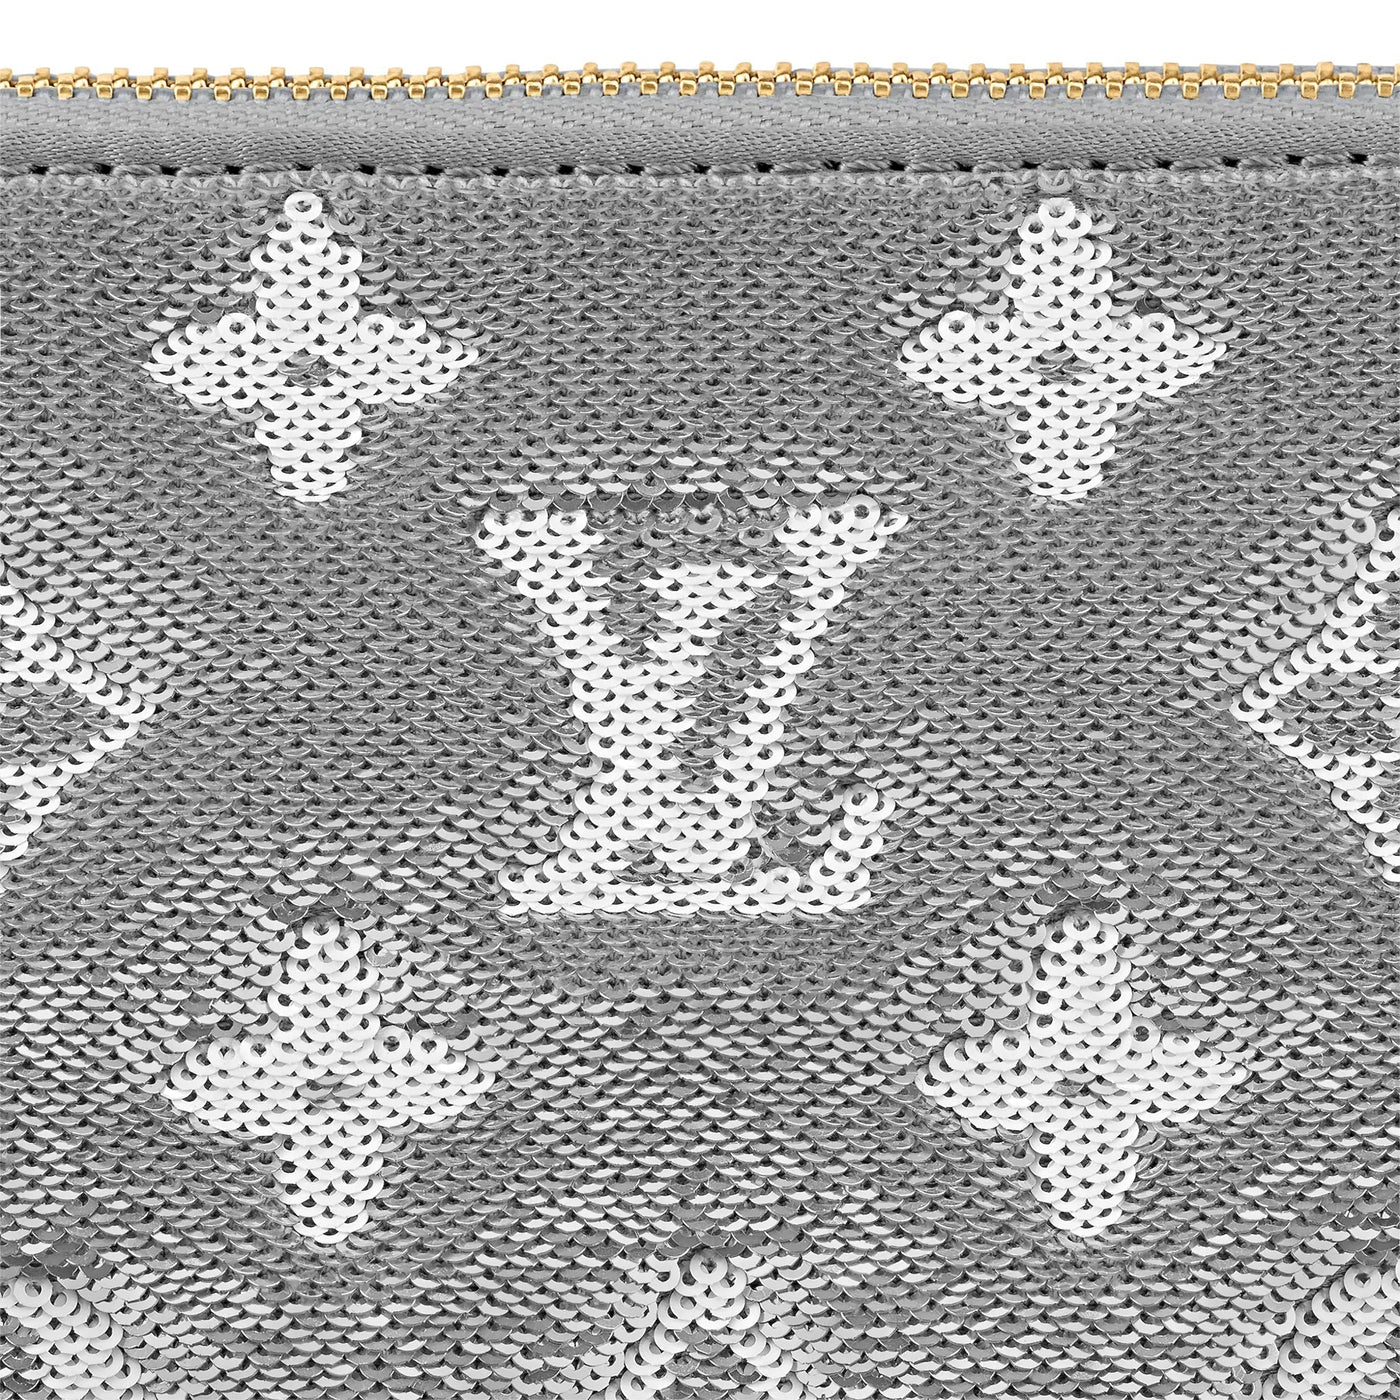 Louis Vuitton Silver Sequin Monogram Coussin BB Silvery Leather